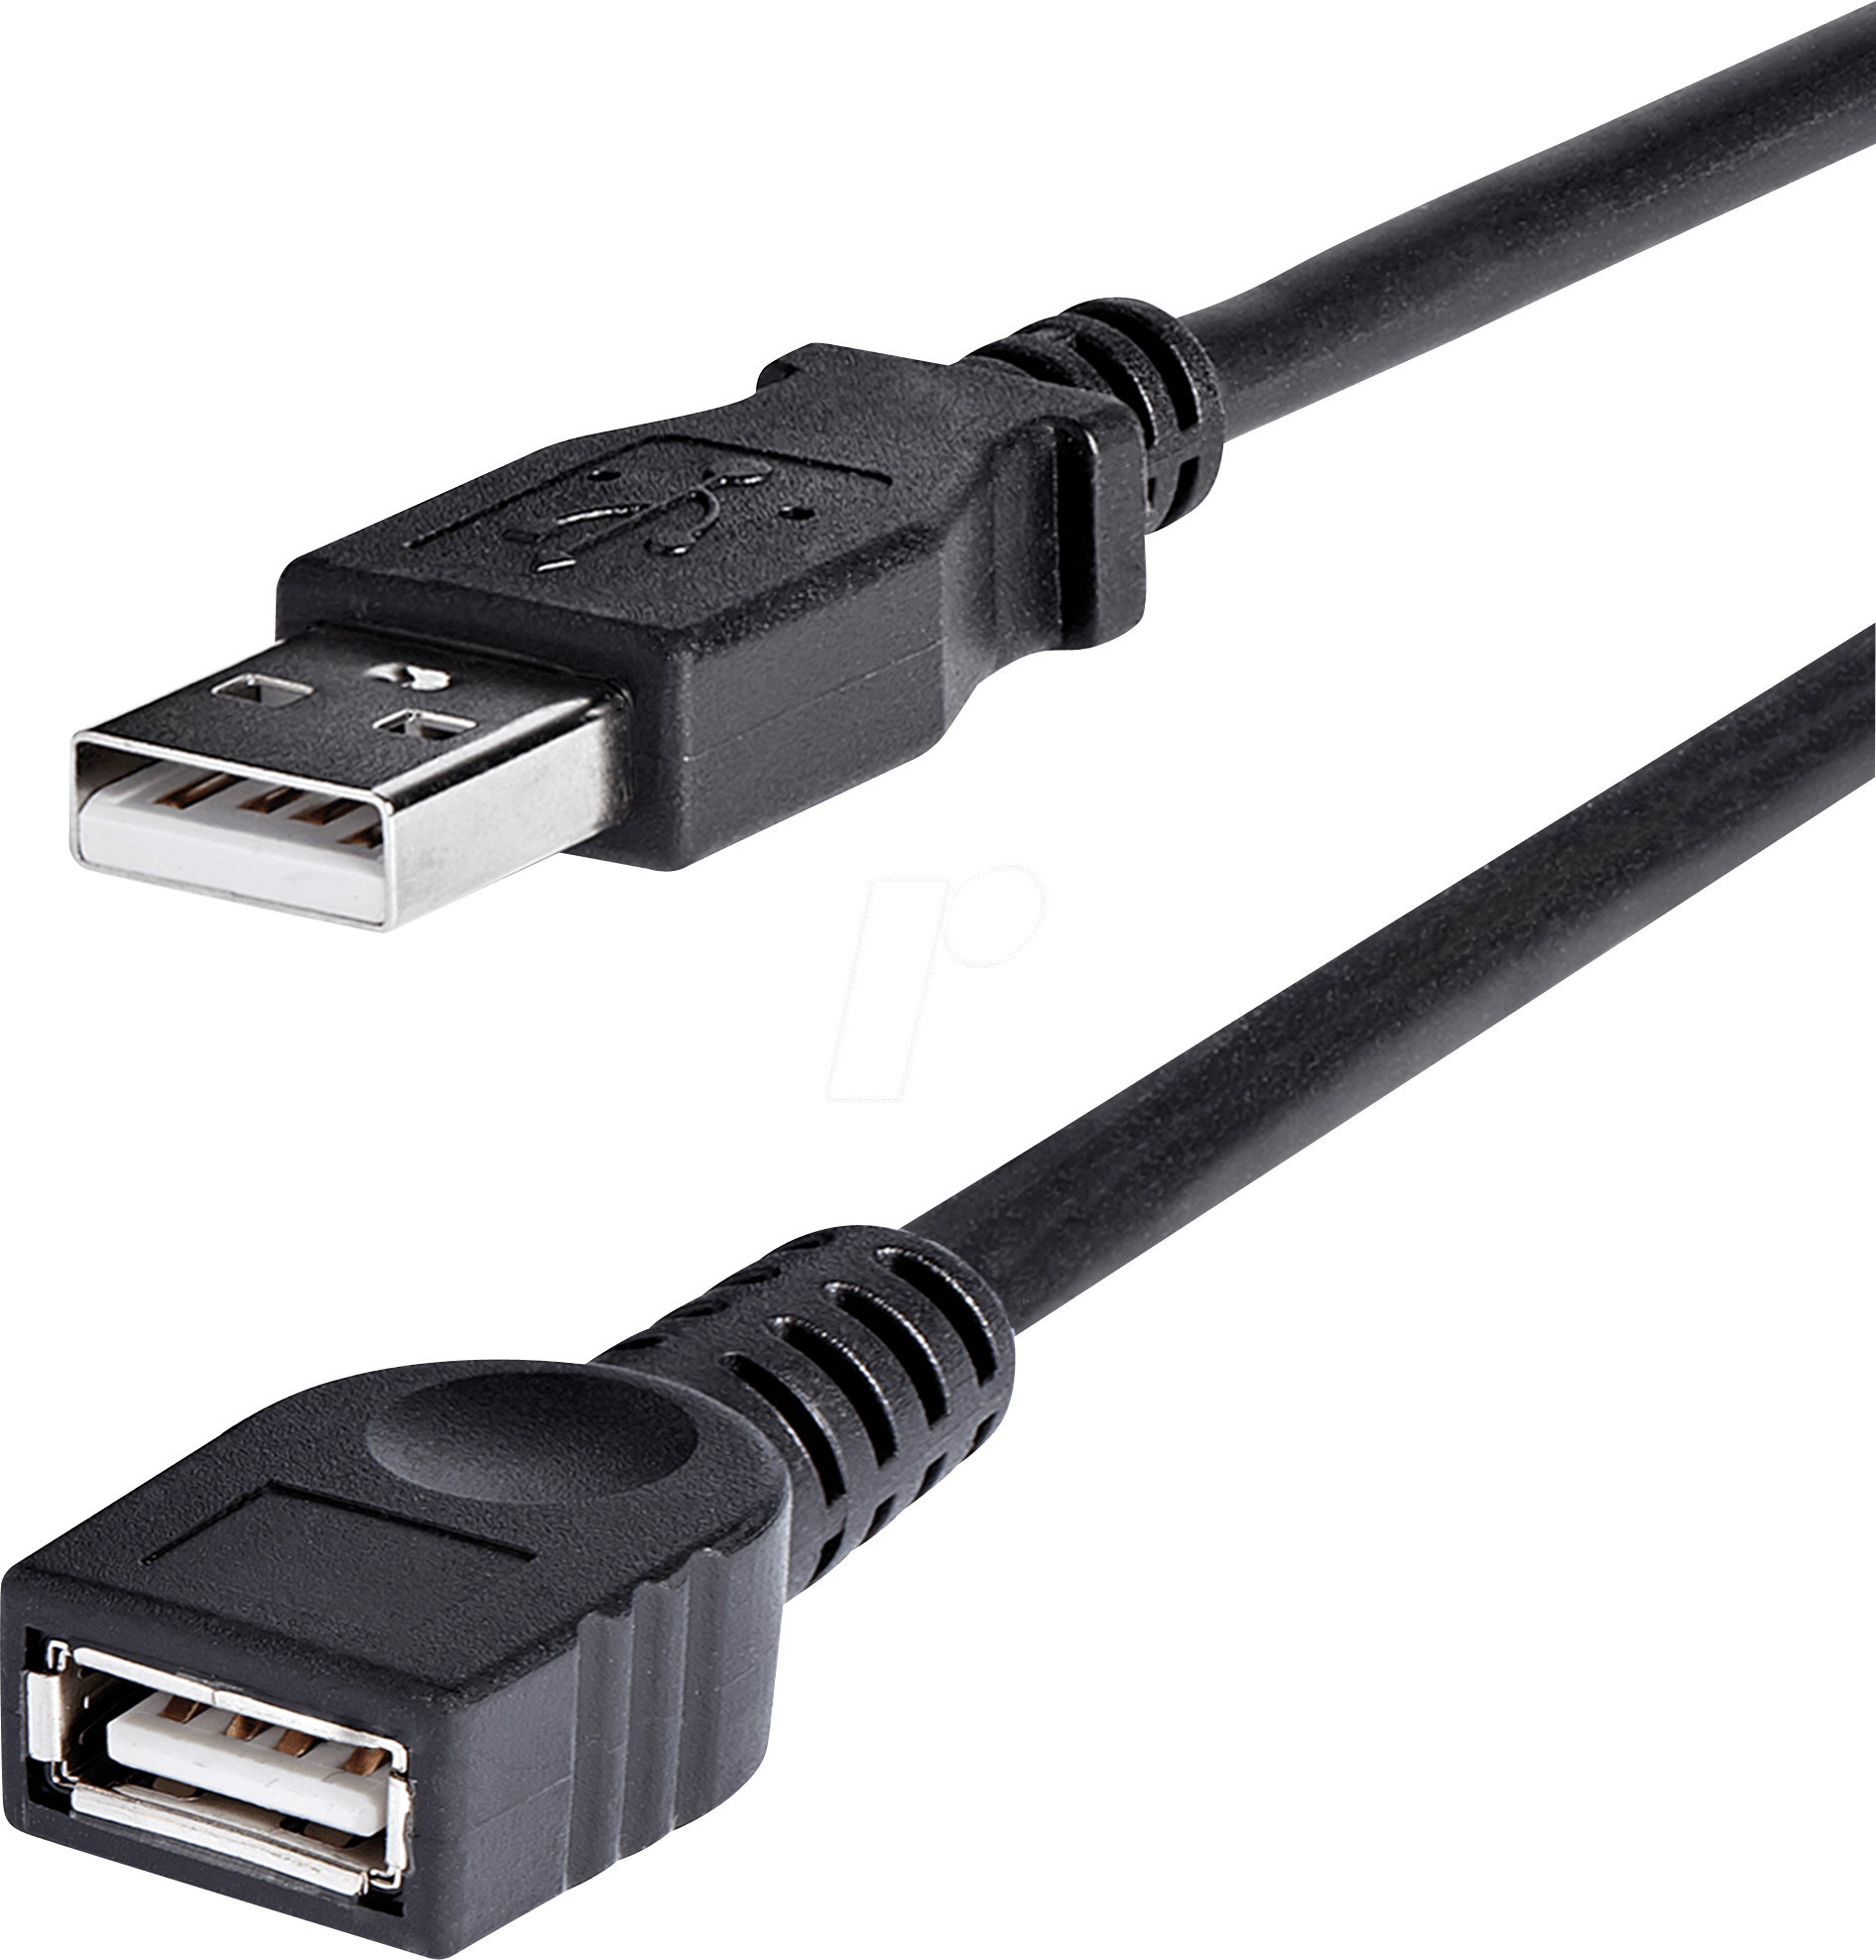 Generic USB Two in one Double Connection Extension Cable Super Speed USB 2.0 Cable Male to Female Data Sync USB 2.0 Extender Cord 39CM Black 